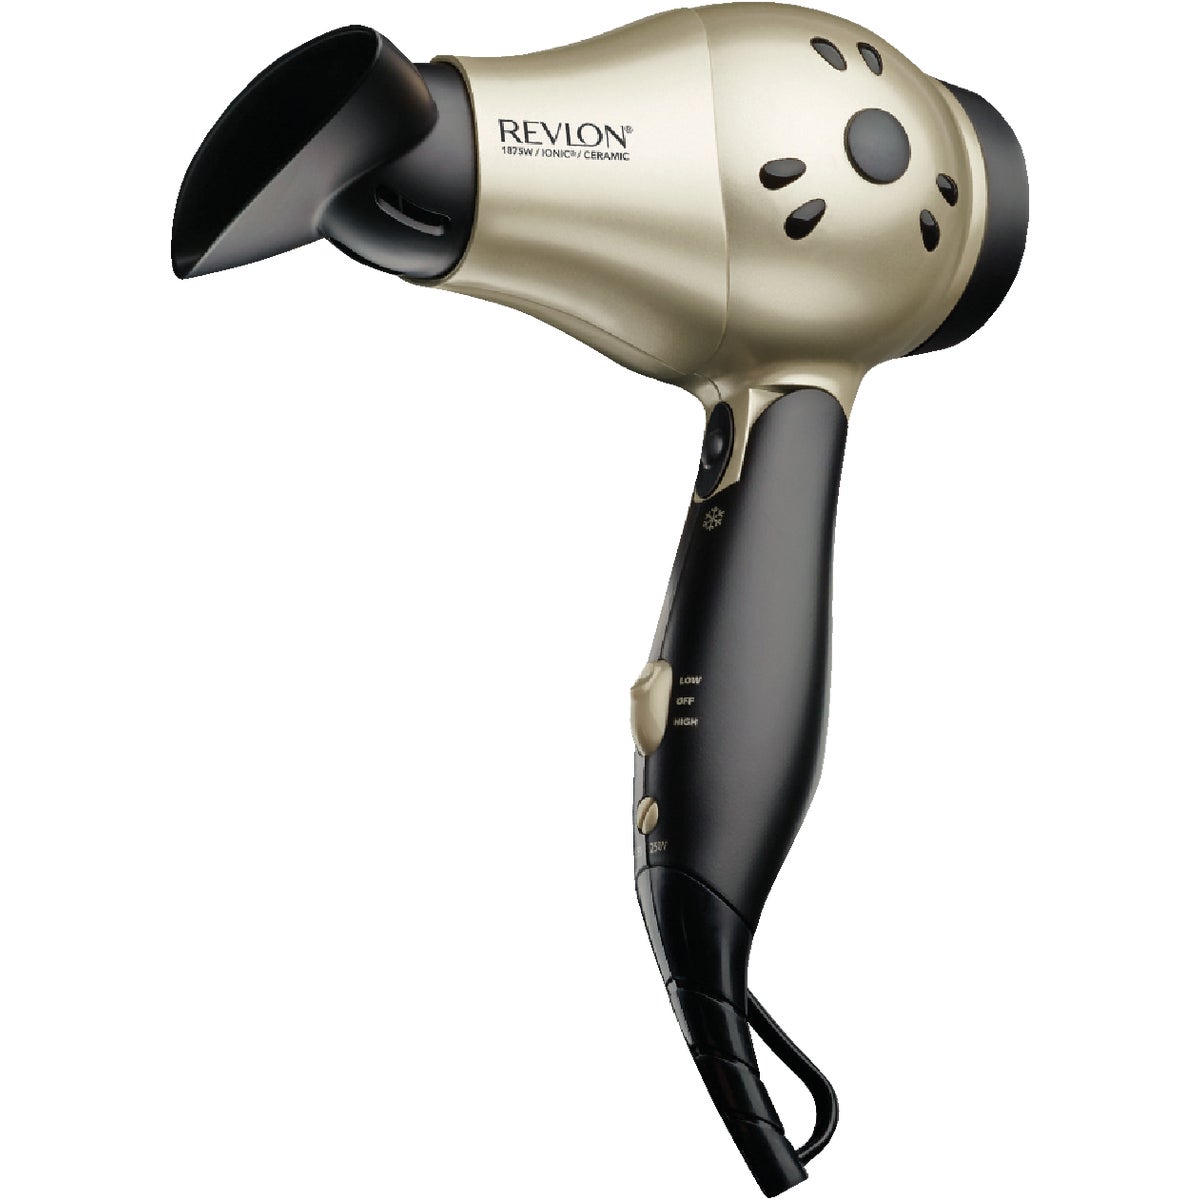 Item 601229, Compact design hair dryer features: Ionic technology, 3X ceramic coating, 2